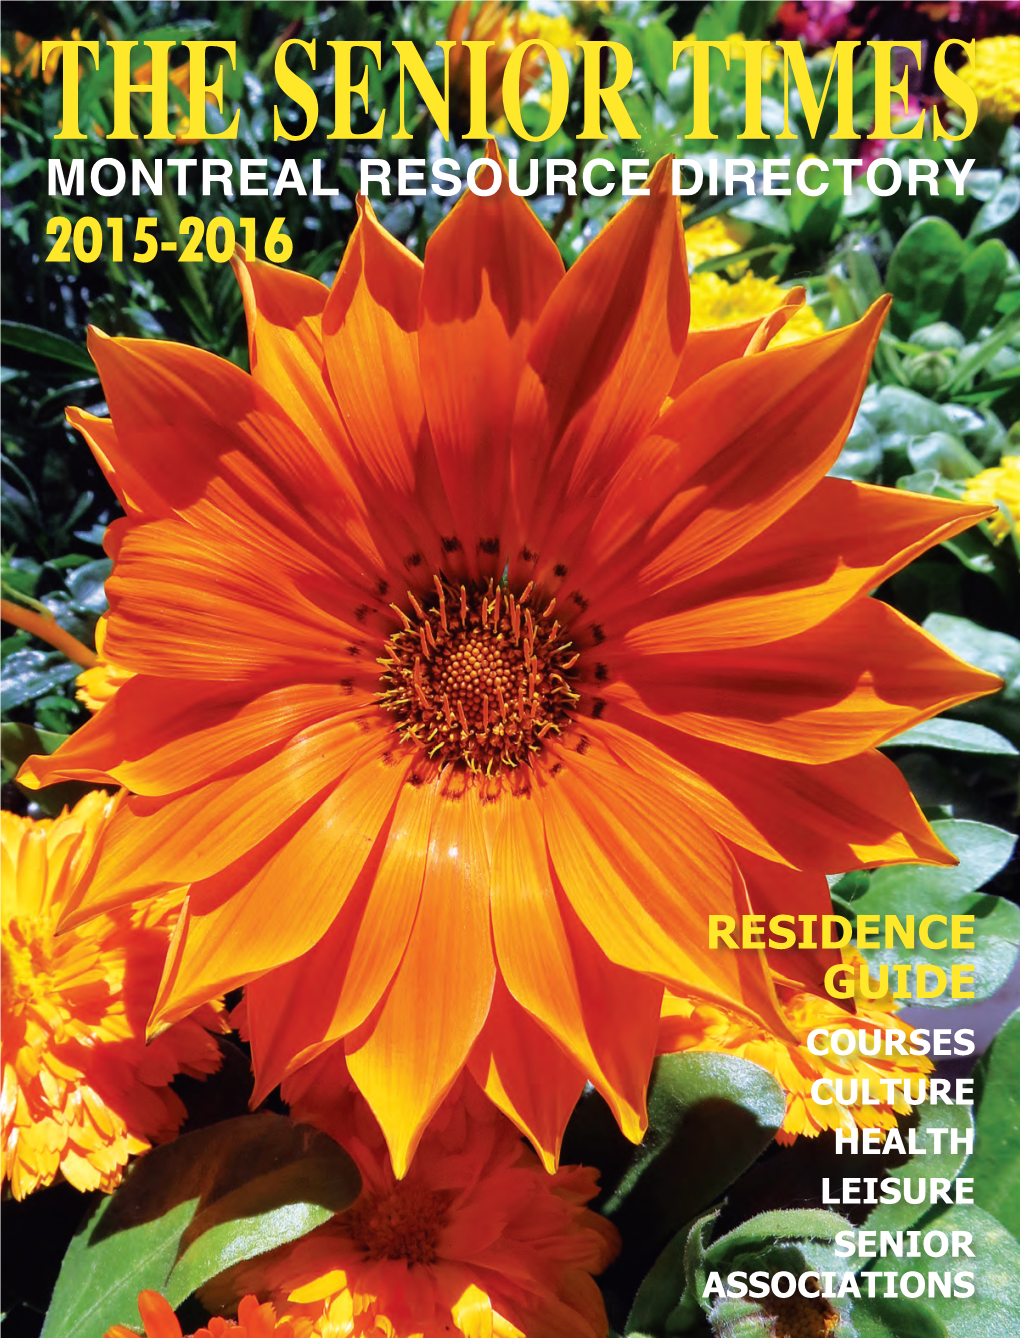 MONTREAL Resource Directory 2015-2016